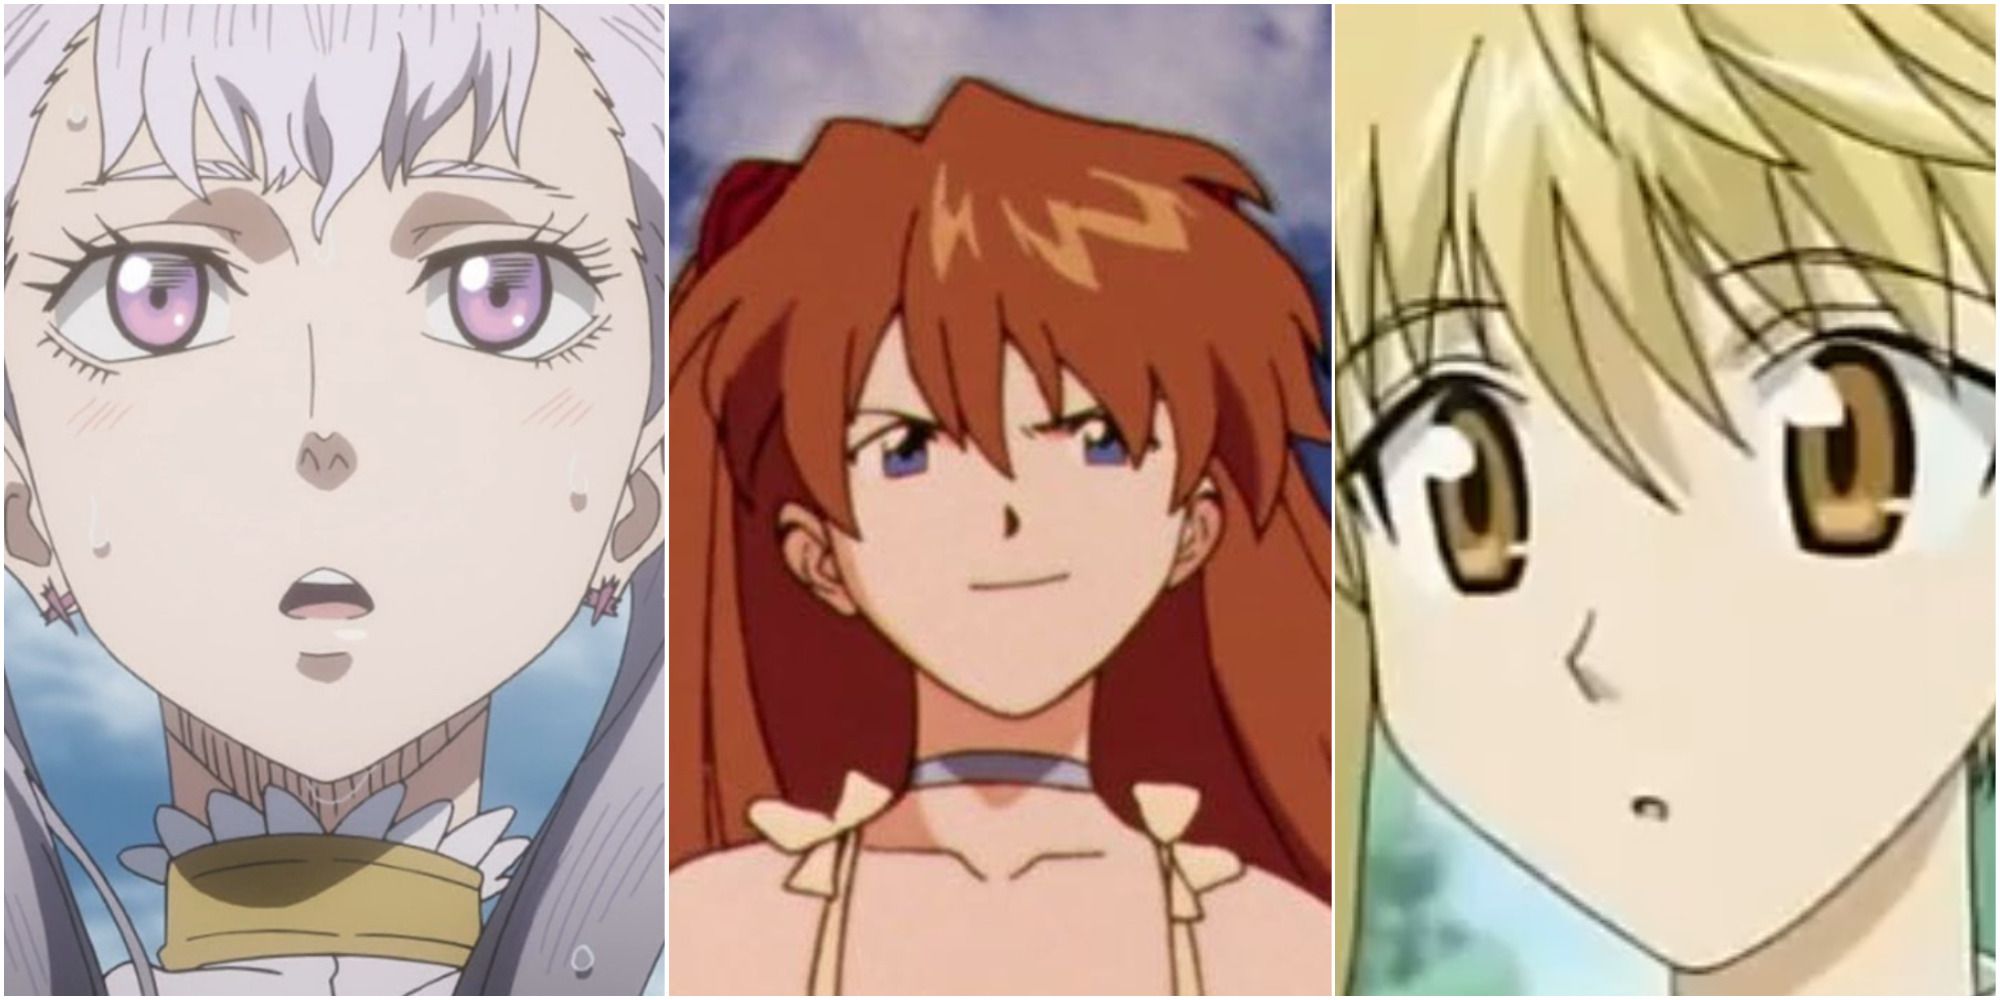 20 Smartest Anime Characters Of All Time Ranked By IQ Level